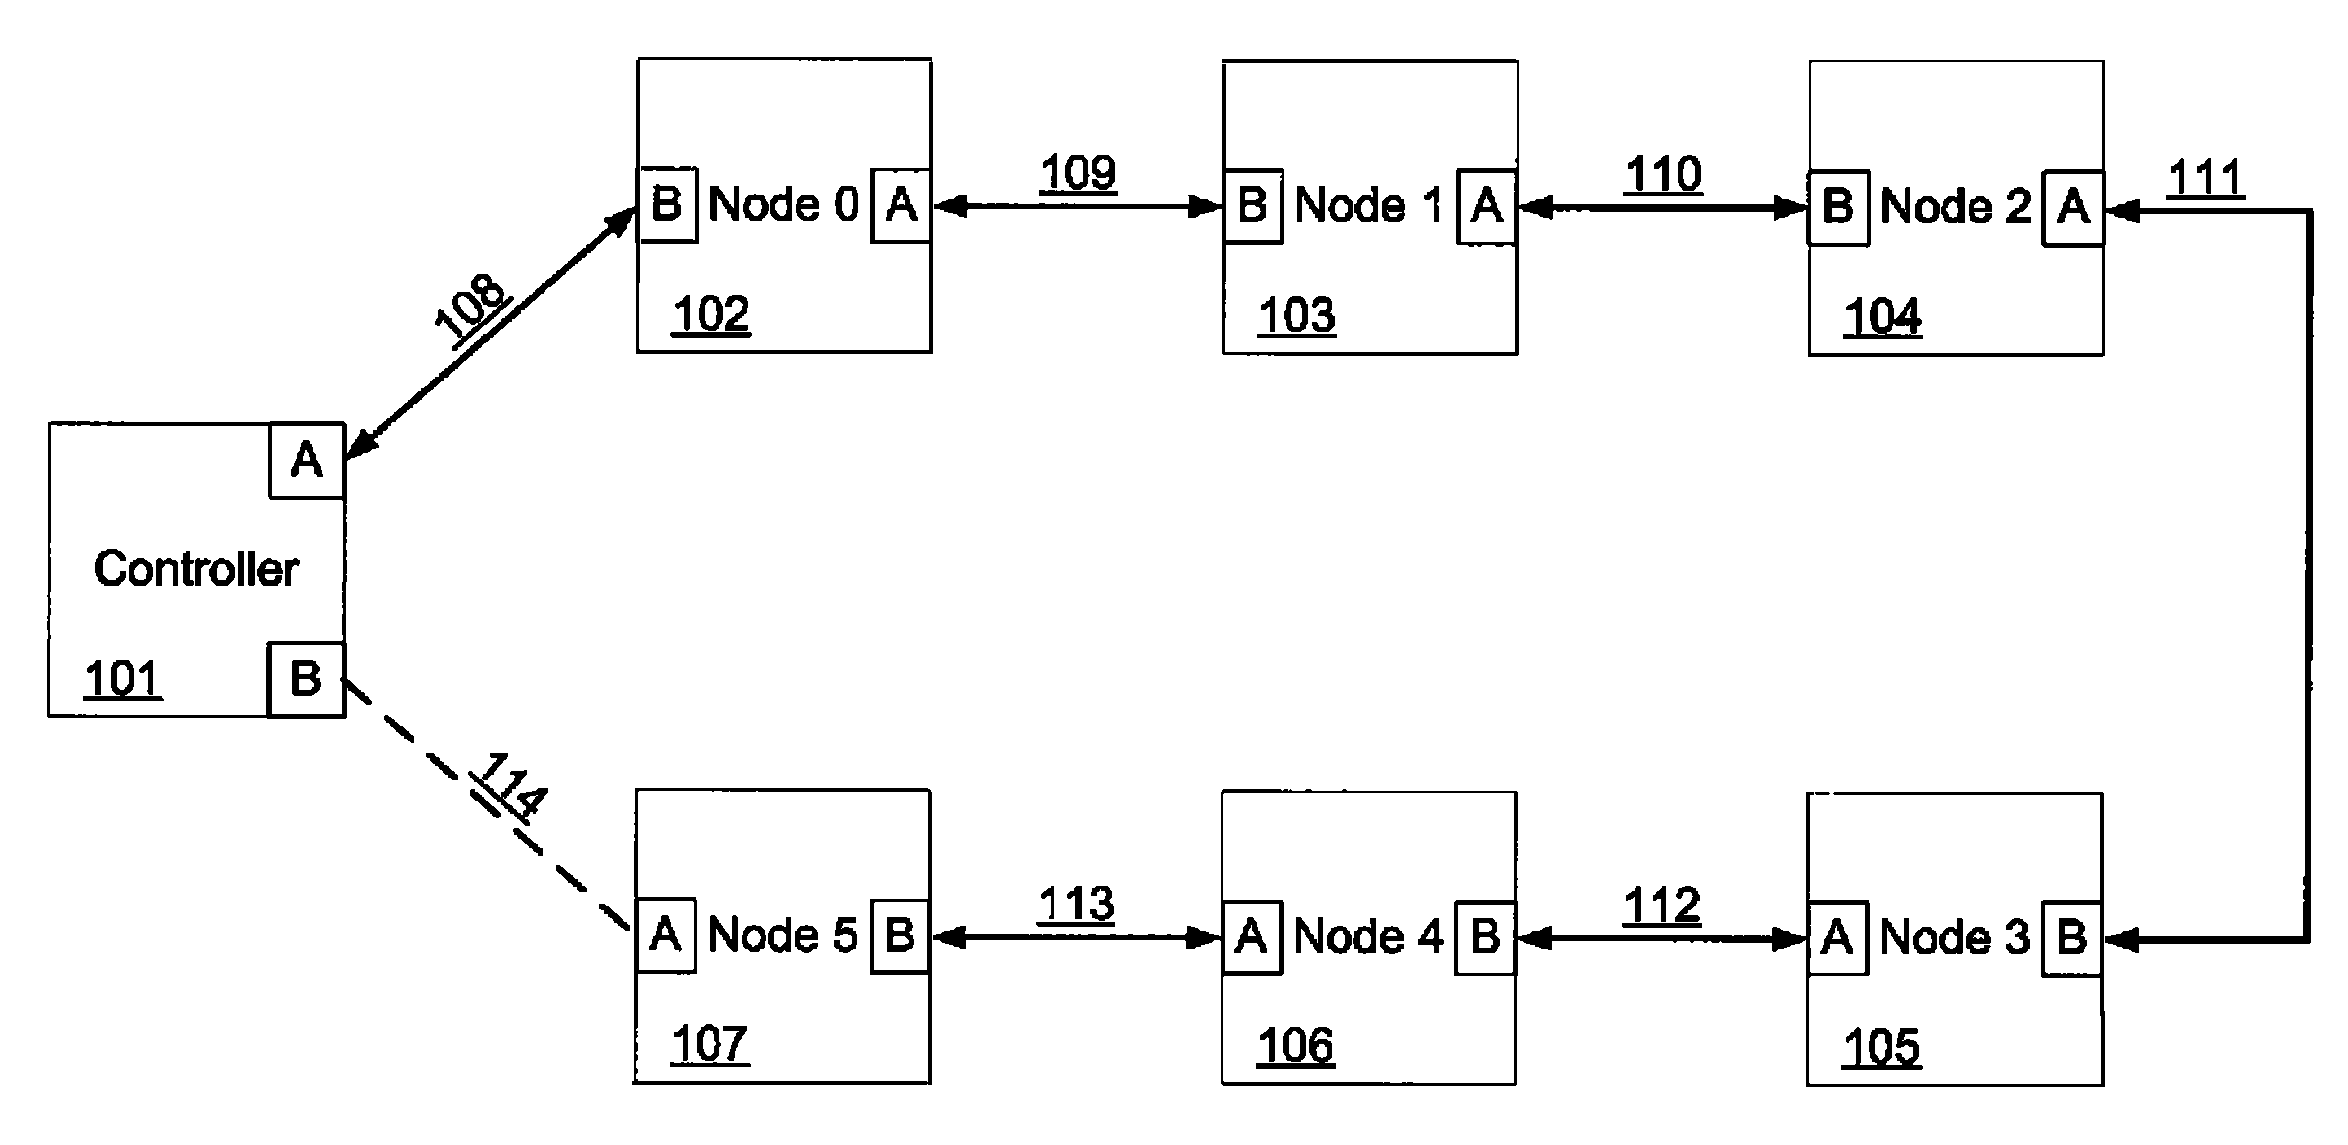 Method and system for removing and returning nodes in a synchronous network